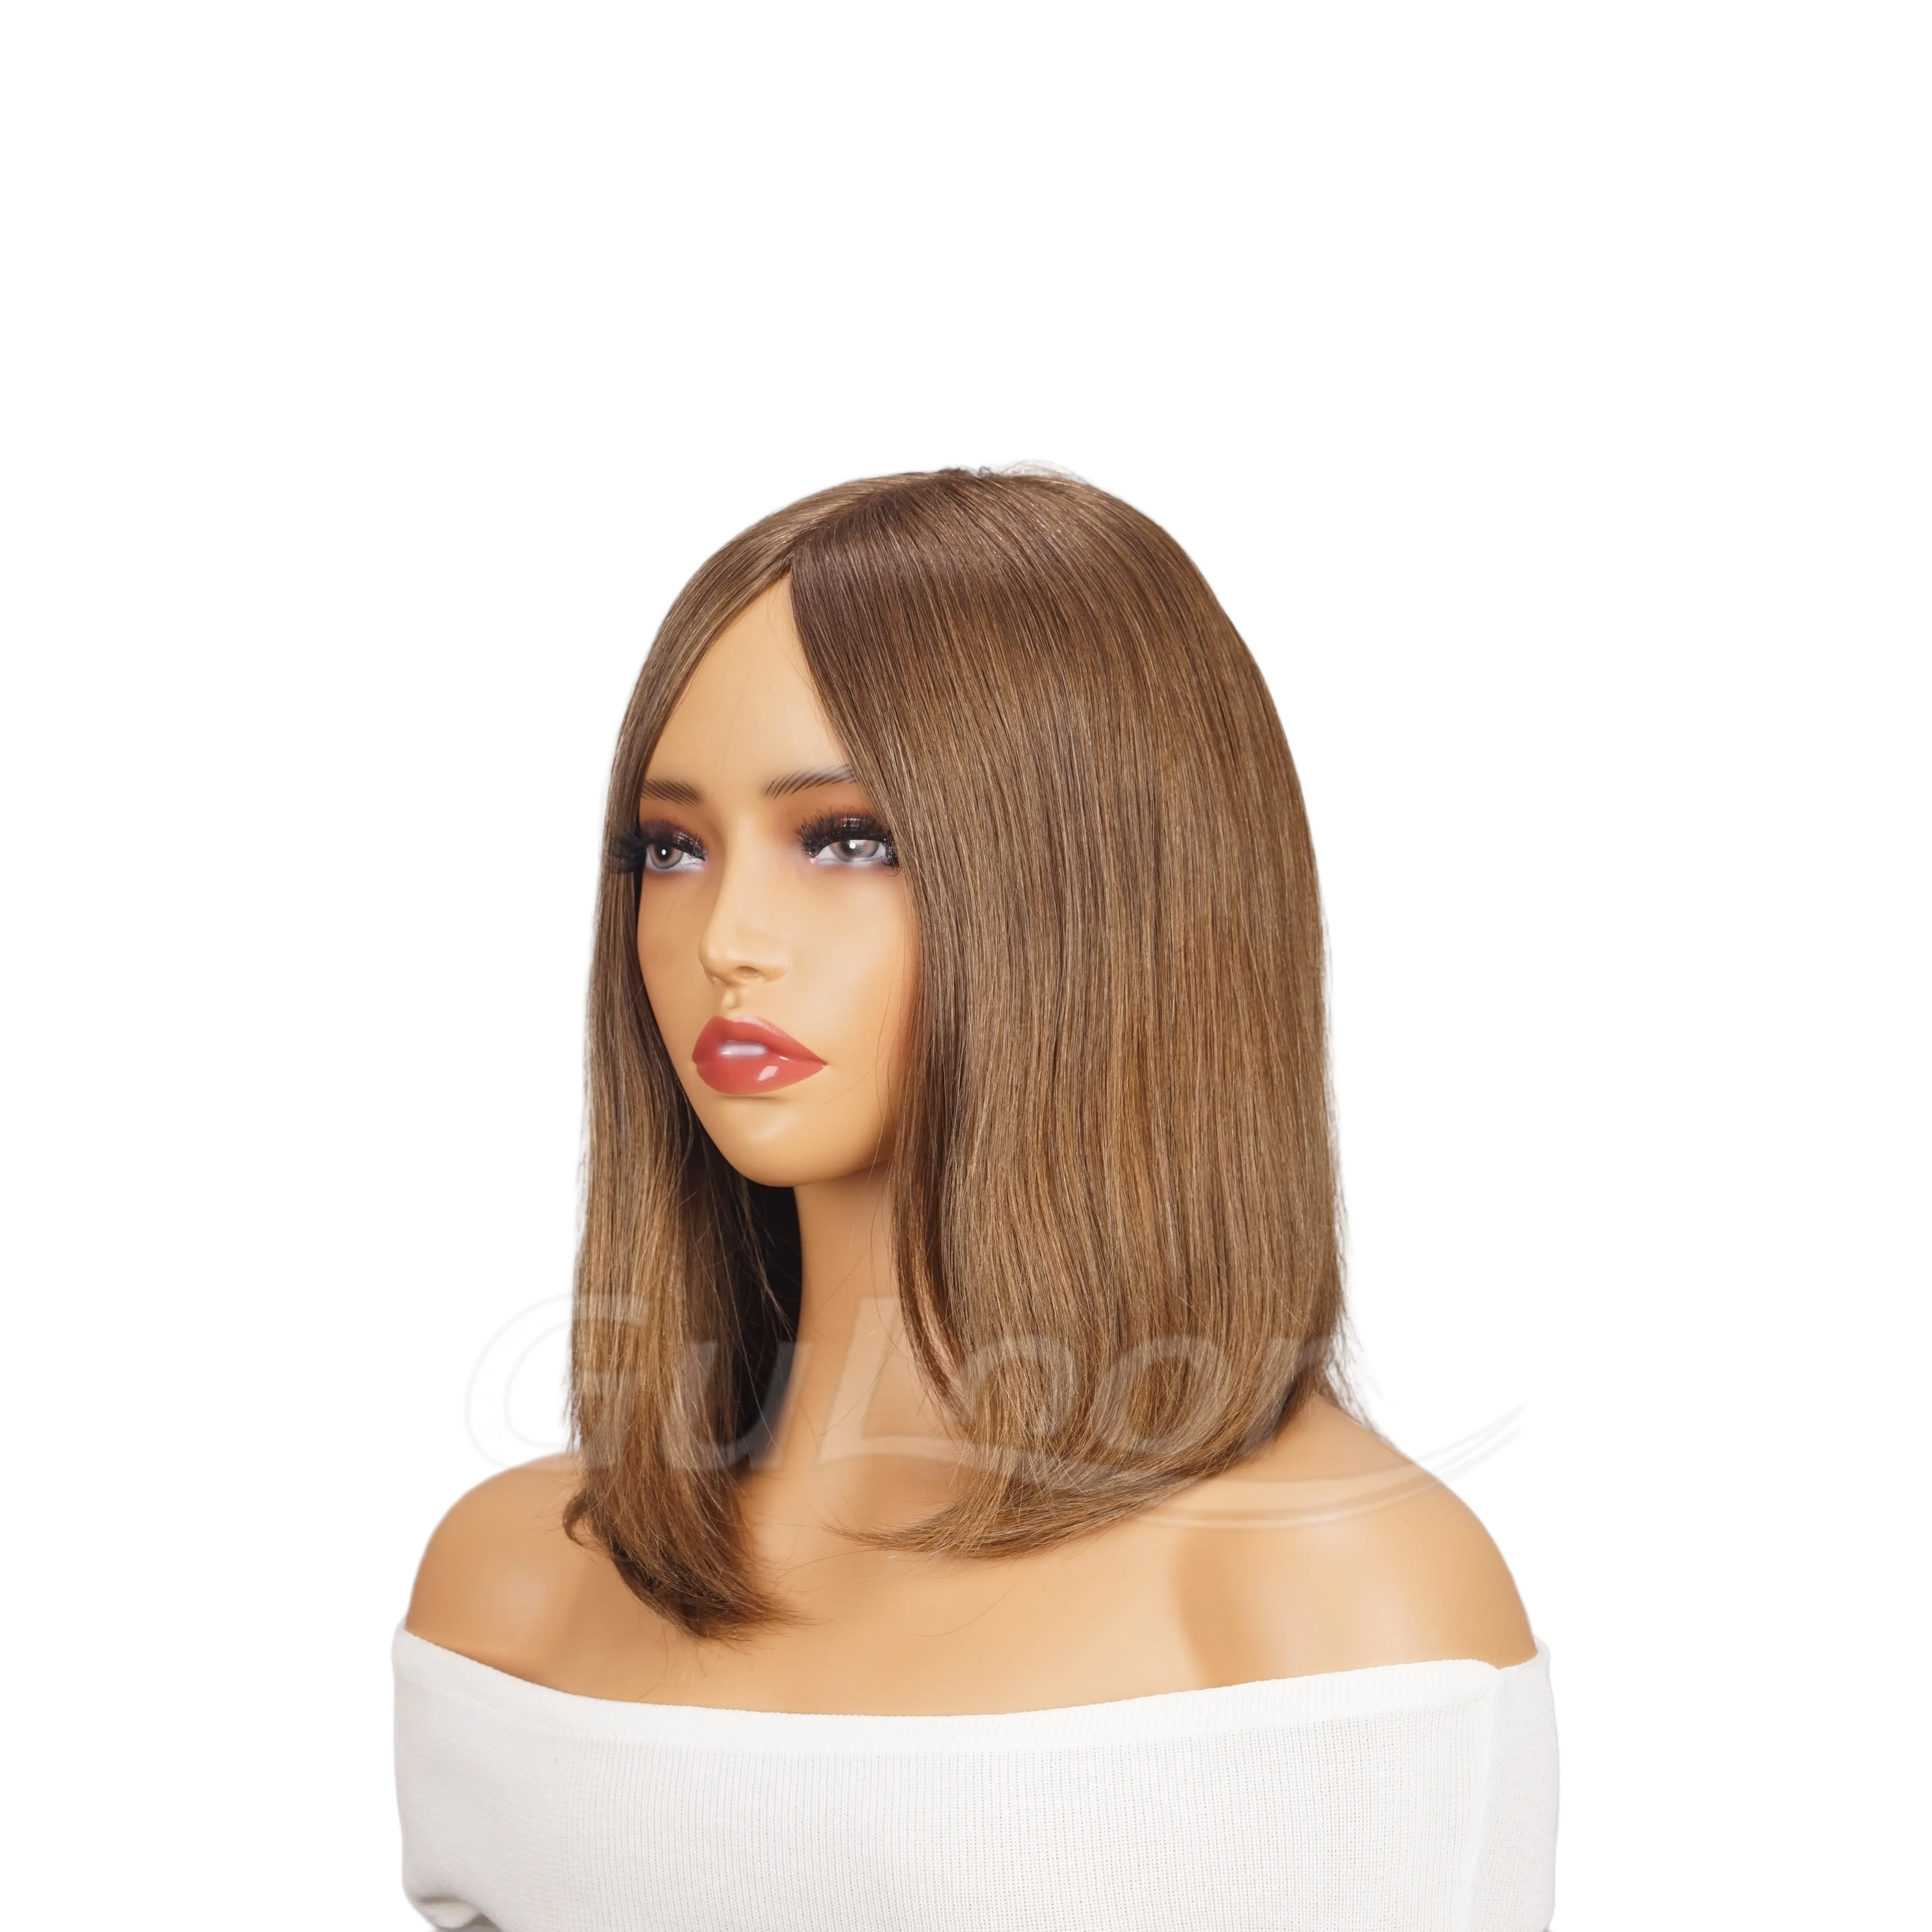 Jewish wig, using European hair as the raw material. Soft, comfortable, and natural.